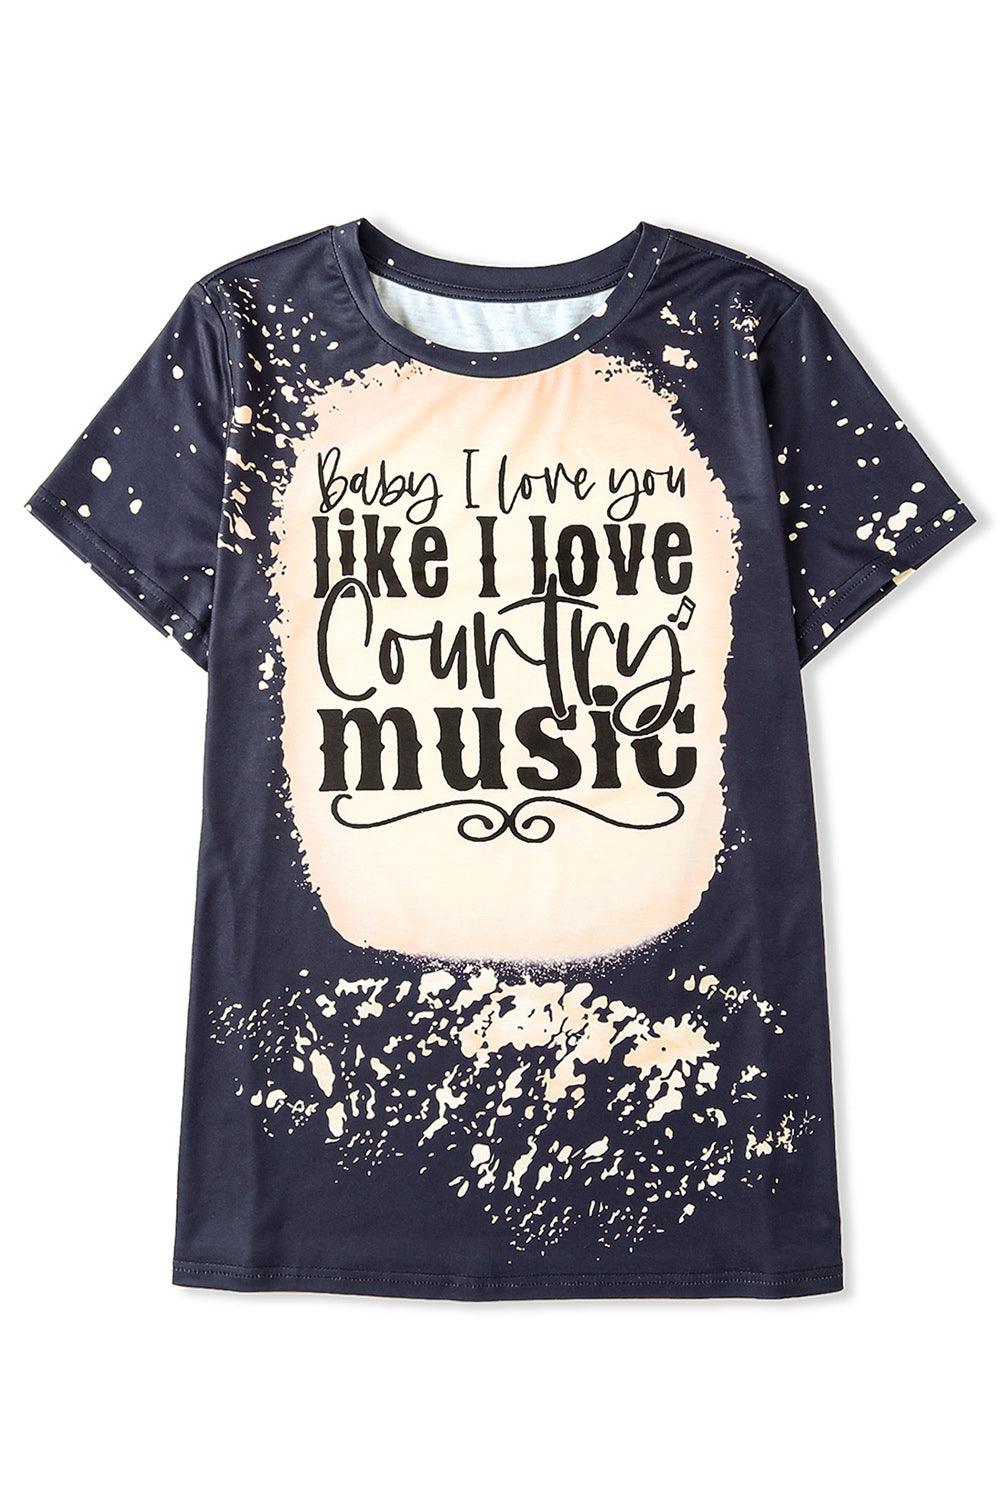 Baby I Love You Like I Love t Country music Graphic Tee